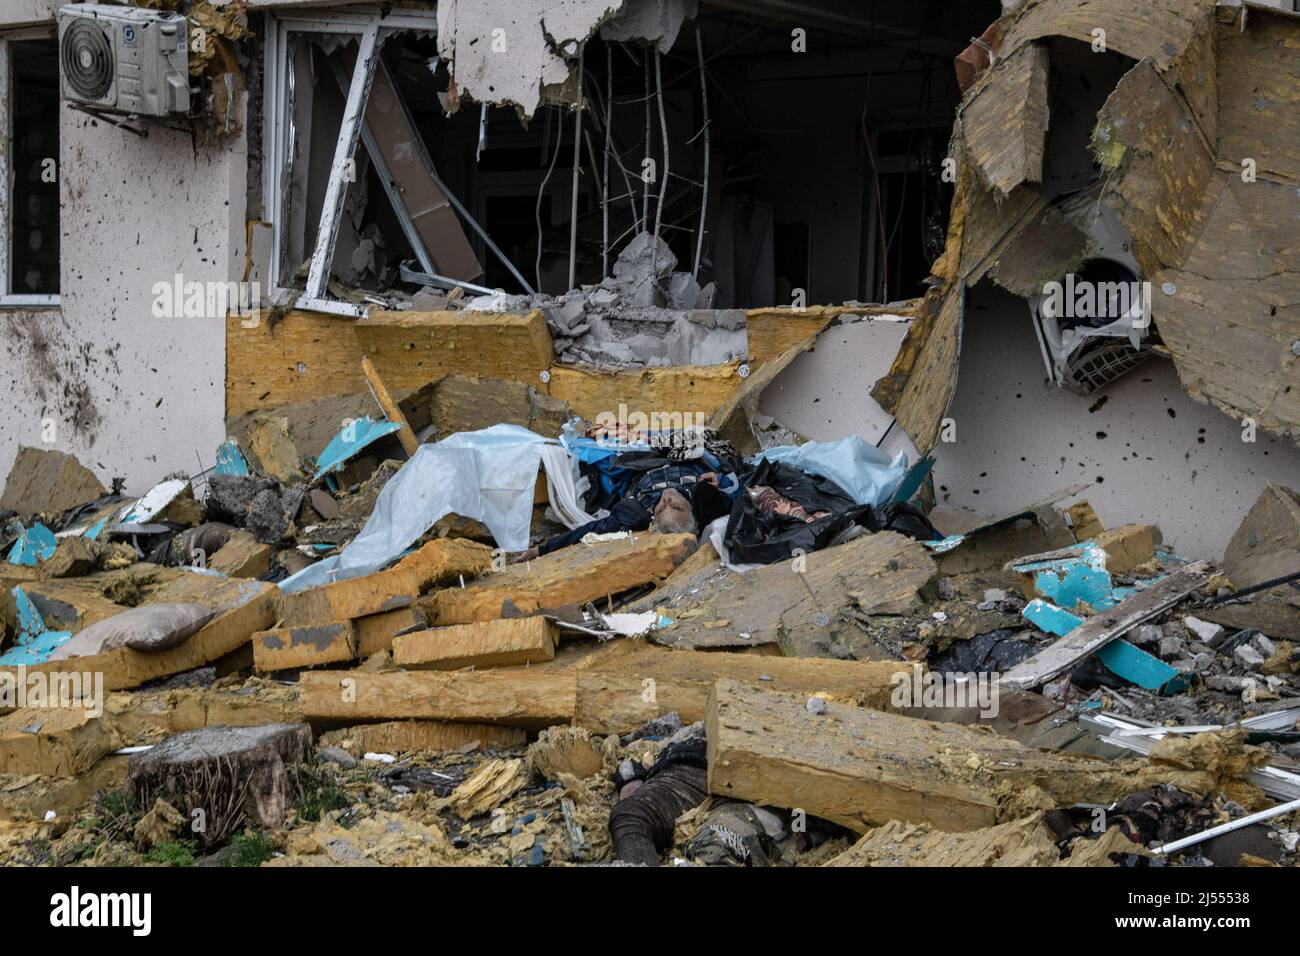 Mariupol, Ukraine. 14th Apr, 2022. (Editors note image depicts death) Multiple bodies killed by shelling lie amidst rubble in a hospital facing the Azovstal plant in Mariupol, one of the last remaining strongholds of the Ukrainian defense. The battle between Russian/Pro Russian forces and the defending Ukrainian forces led by the Azov battalion continues in the port city of Mariupol. (Photo by Maximilian Clarke/SOPA Images/Sipa USA) Credit: Sipa USA/Alamy Live News Stock Photo